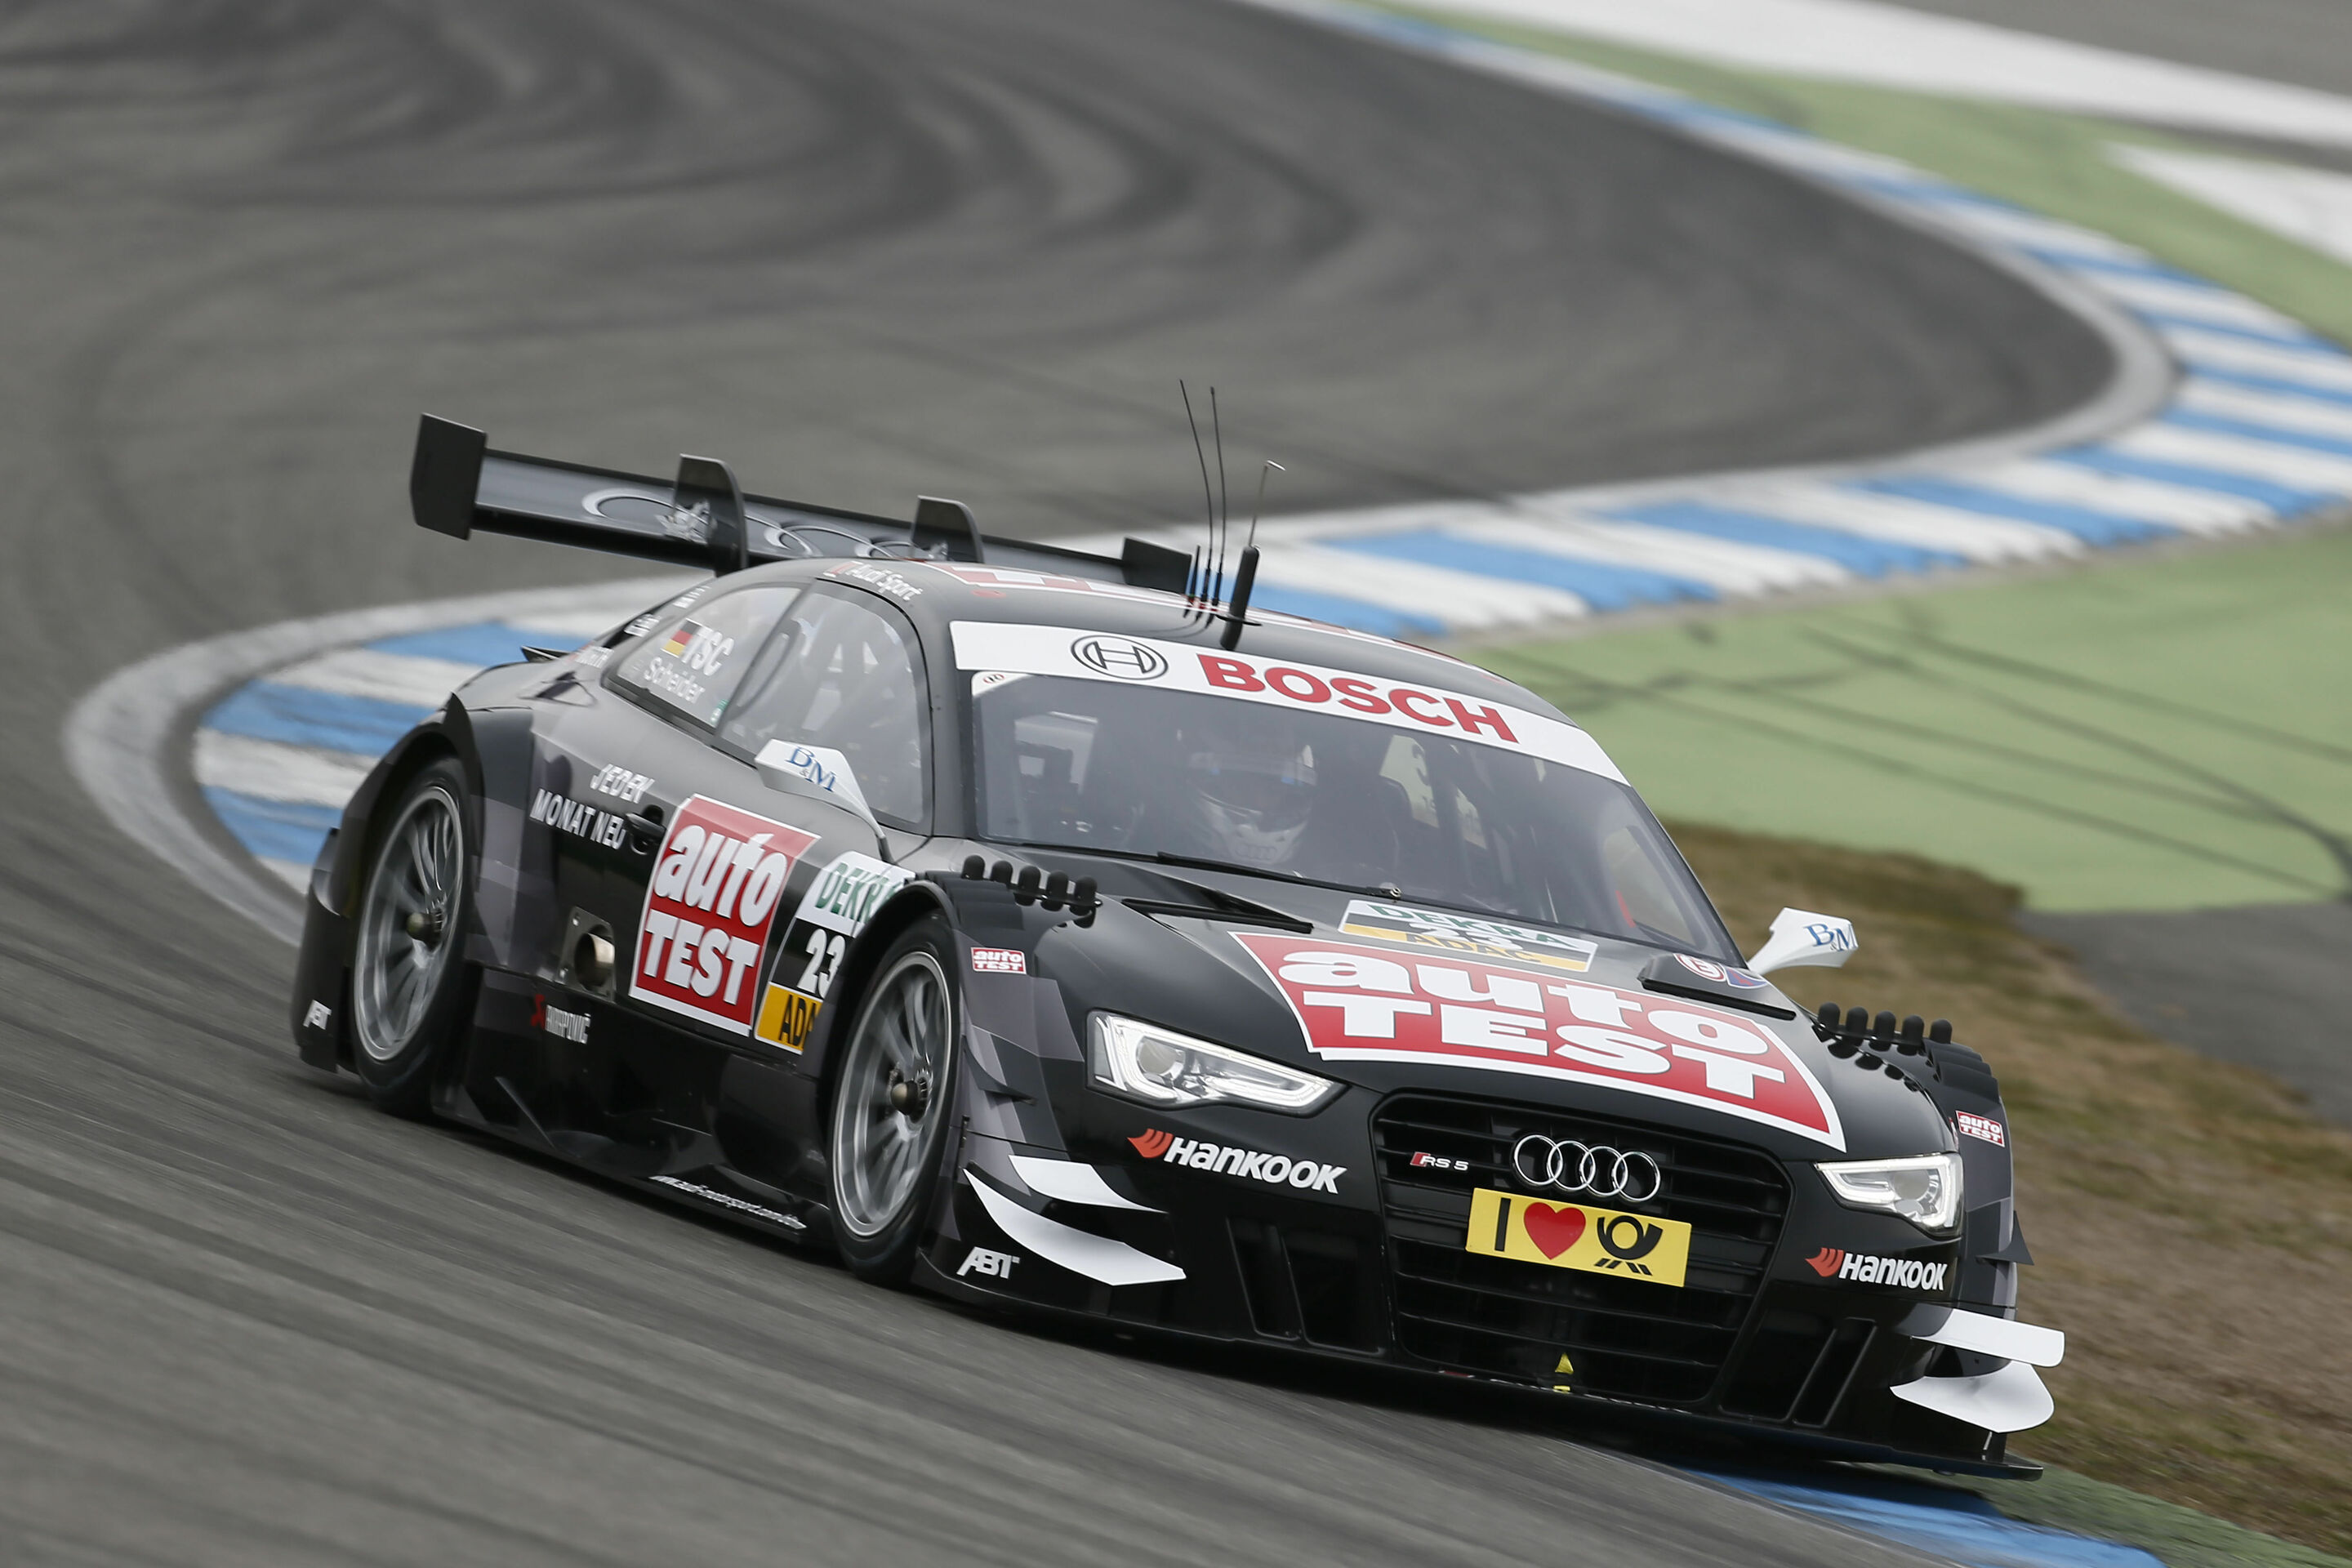 Audi completed four days of testing at Hockenheim